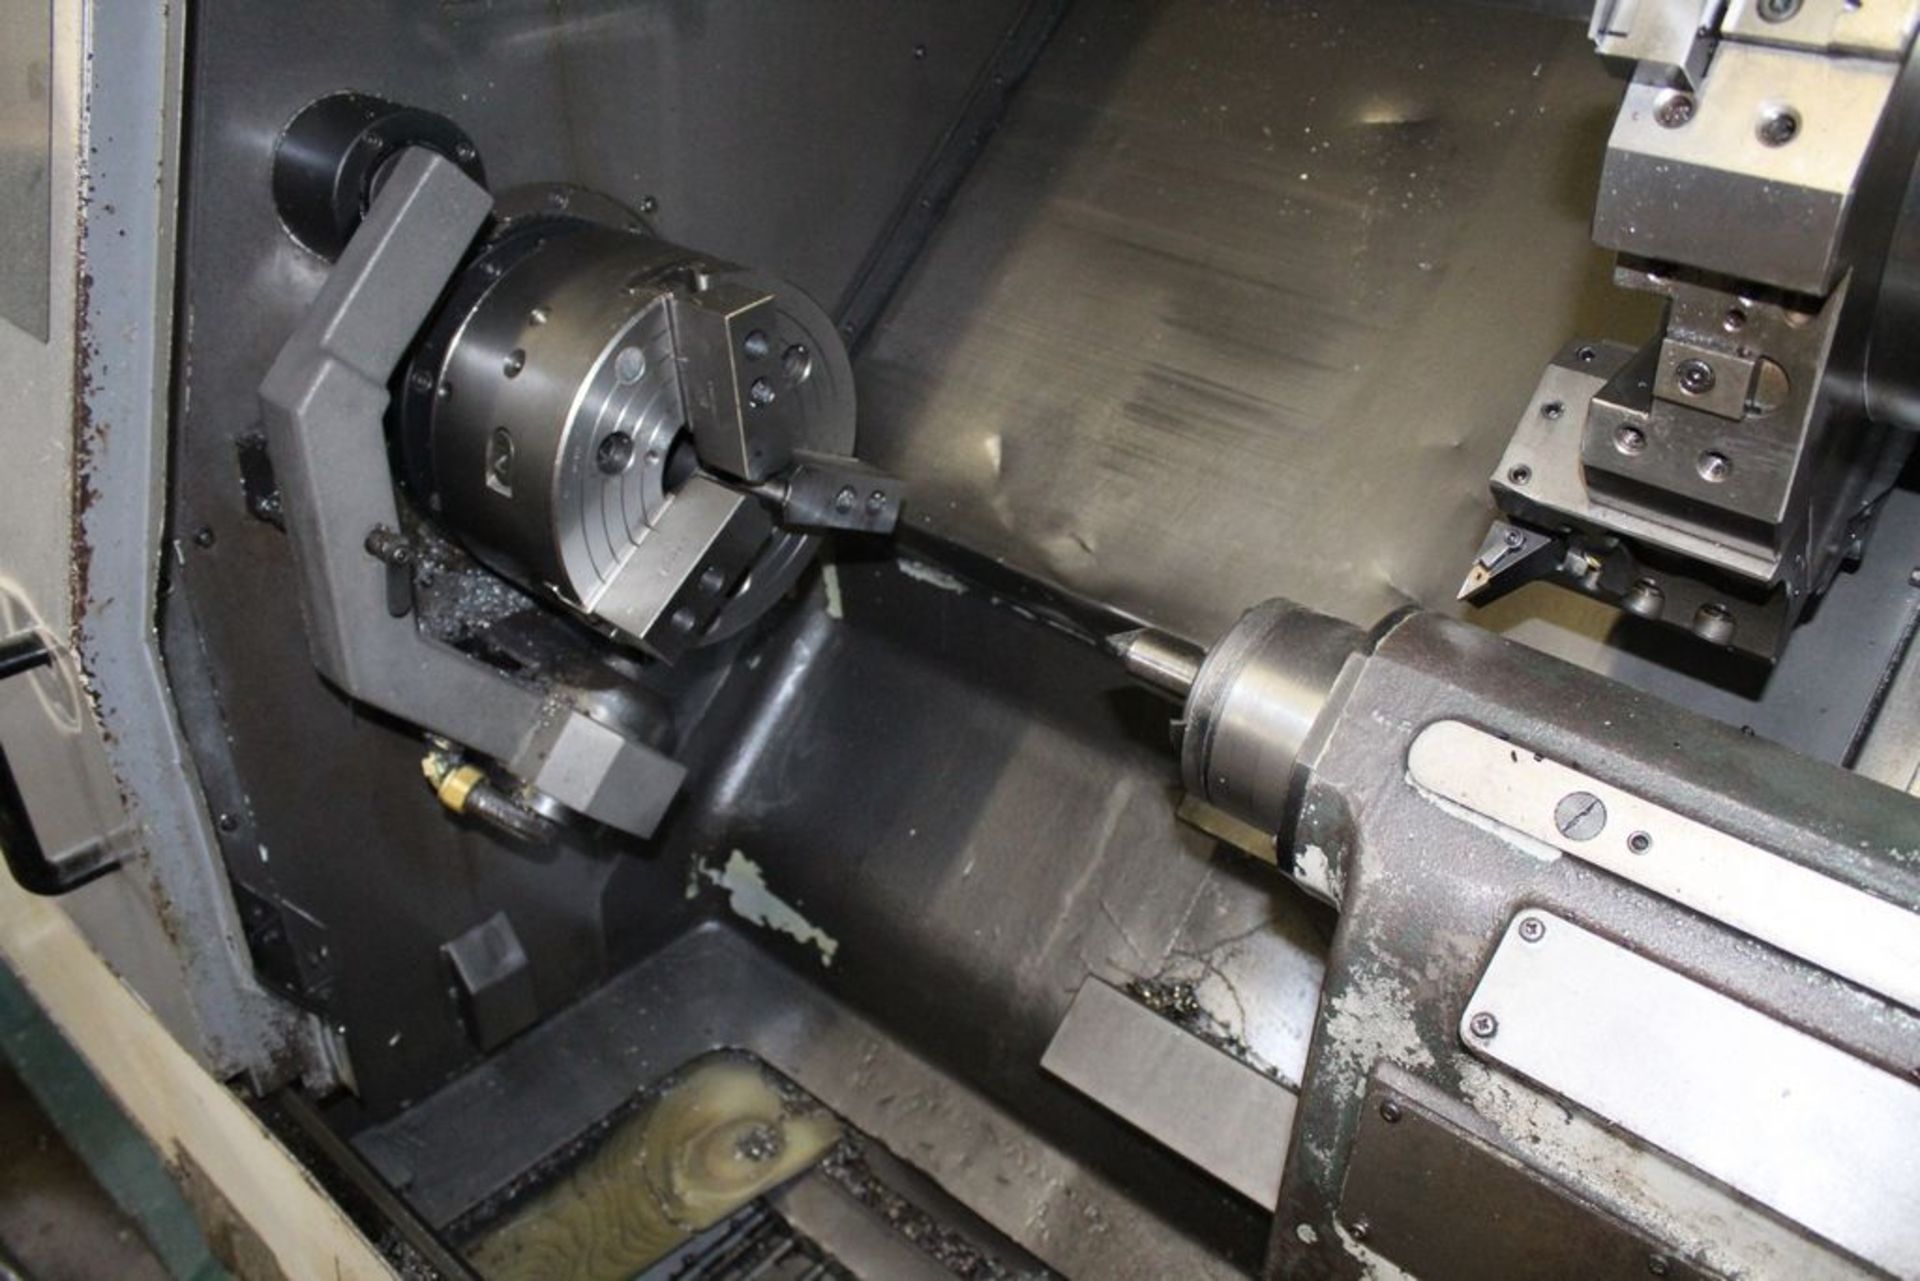 MORI SEIKI MODEL SL-25 CNC TURNING CENTER, S/N 6521, 10ö 3-JAW CHUCK, TAILSTOCK, MF-T6 CONTROL, WITH - Image 3 of 6